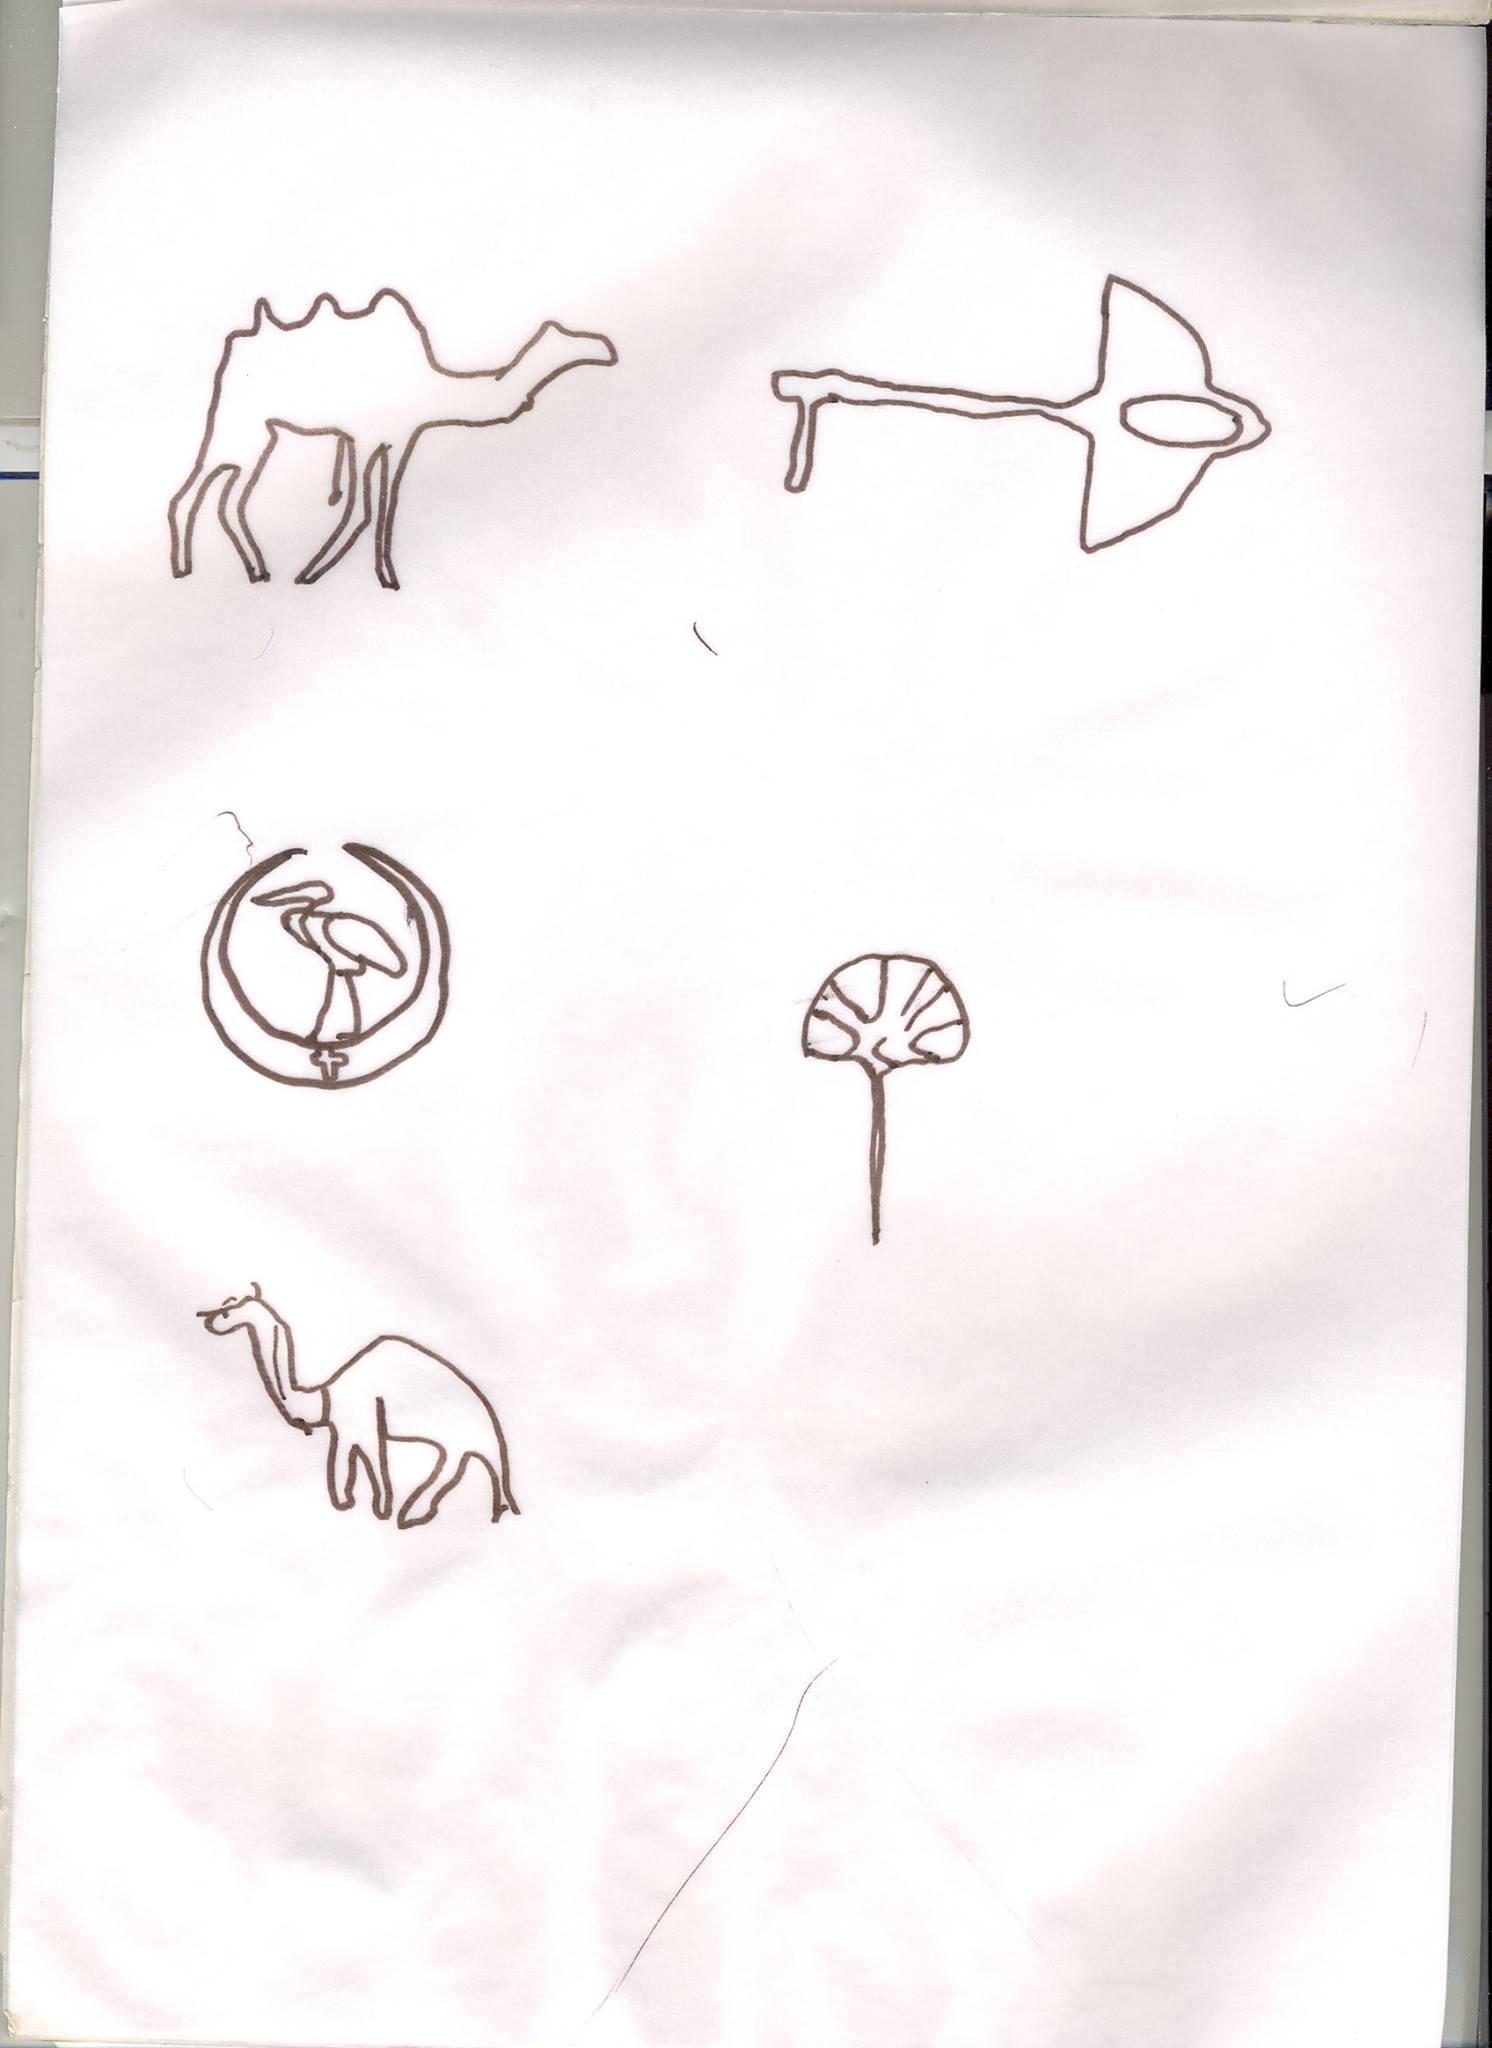 the paper is white and black, with the outlines of different animals on it